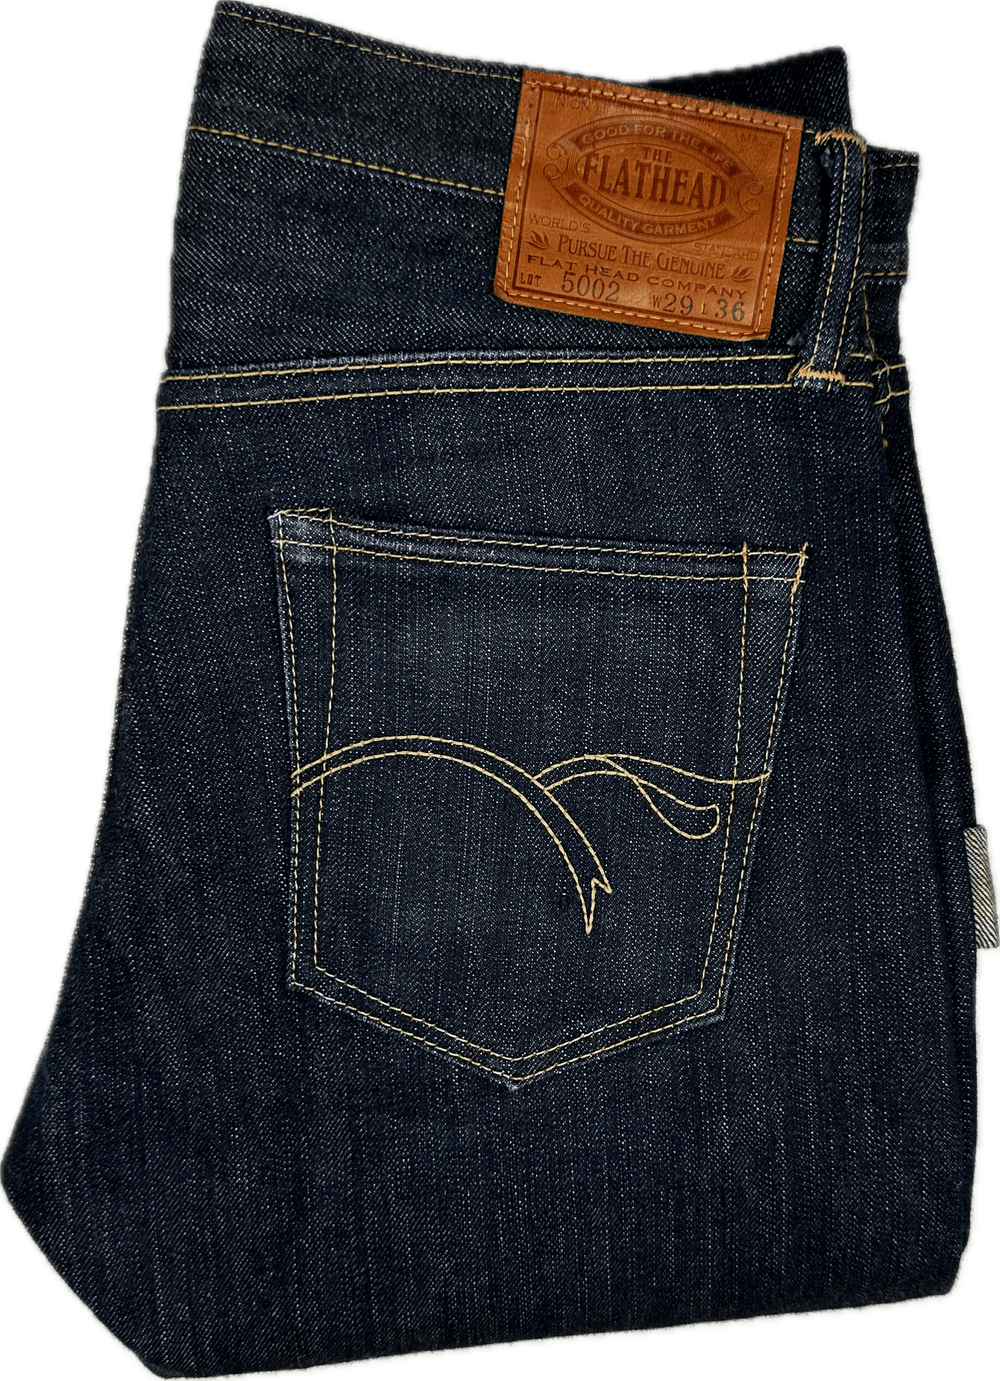 The Flat Head Mens 5002 Selvedge Jeans Made in Japan - Size 29 - Jean Pool